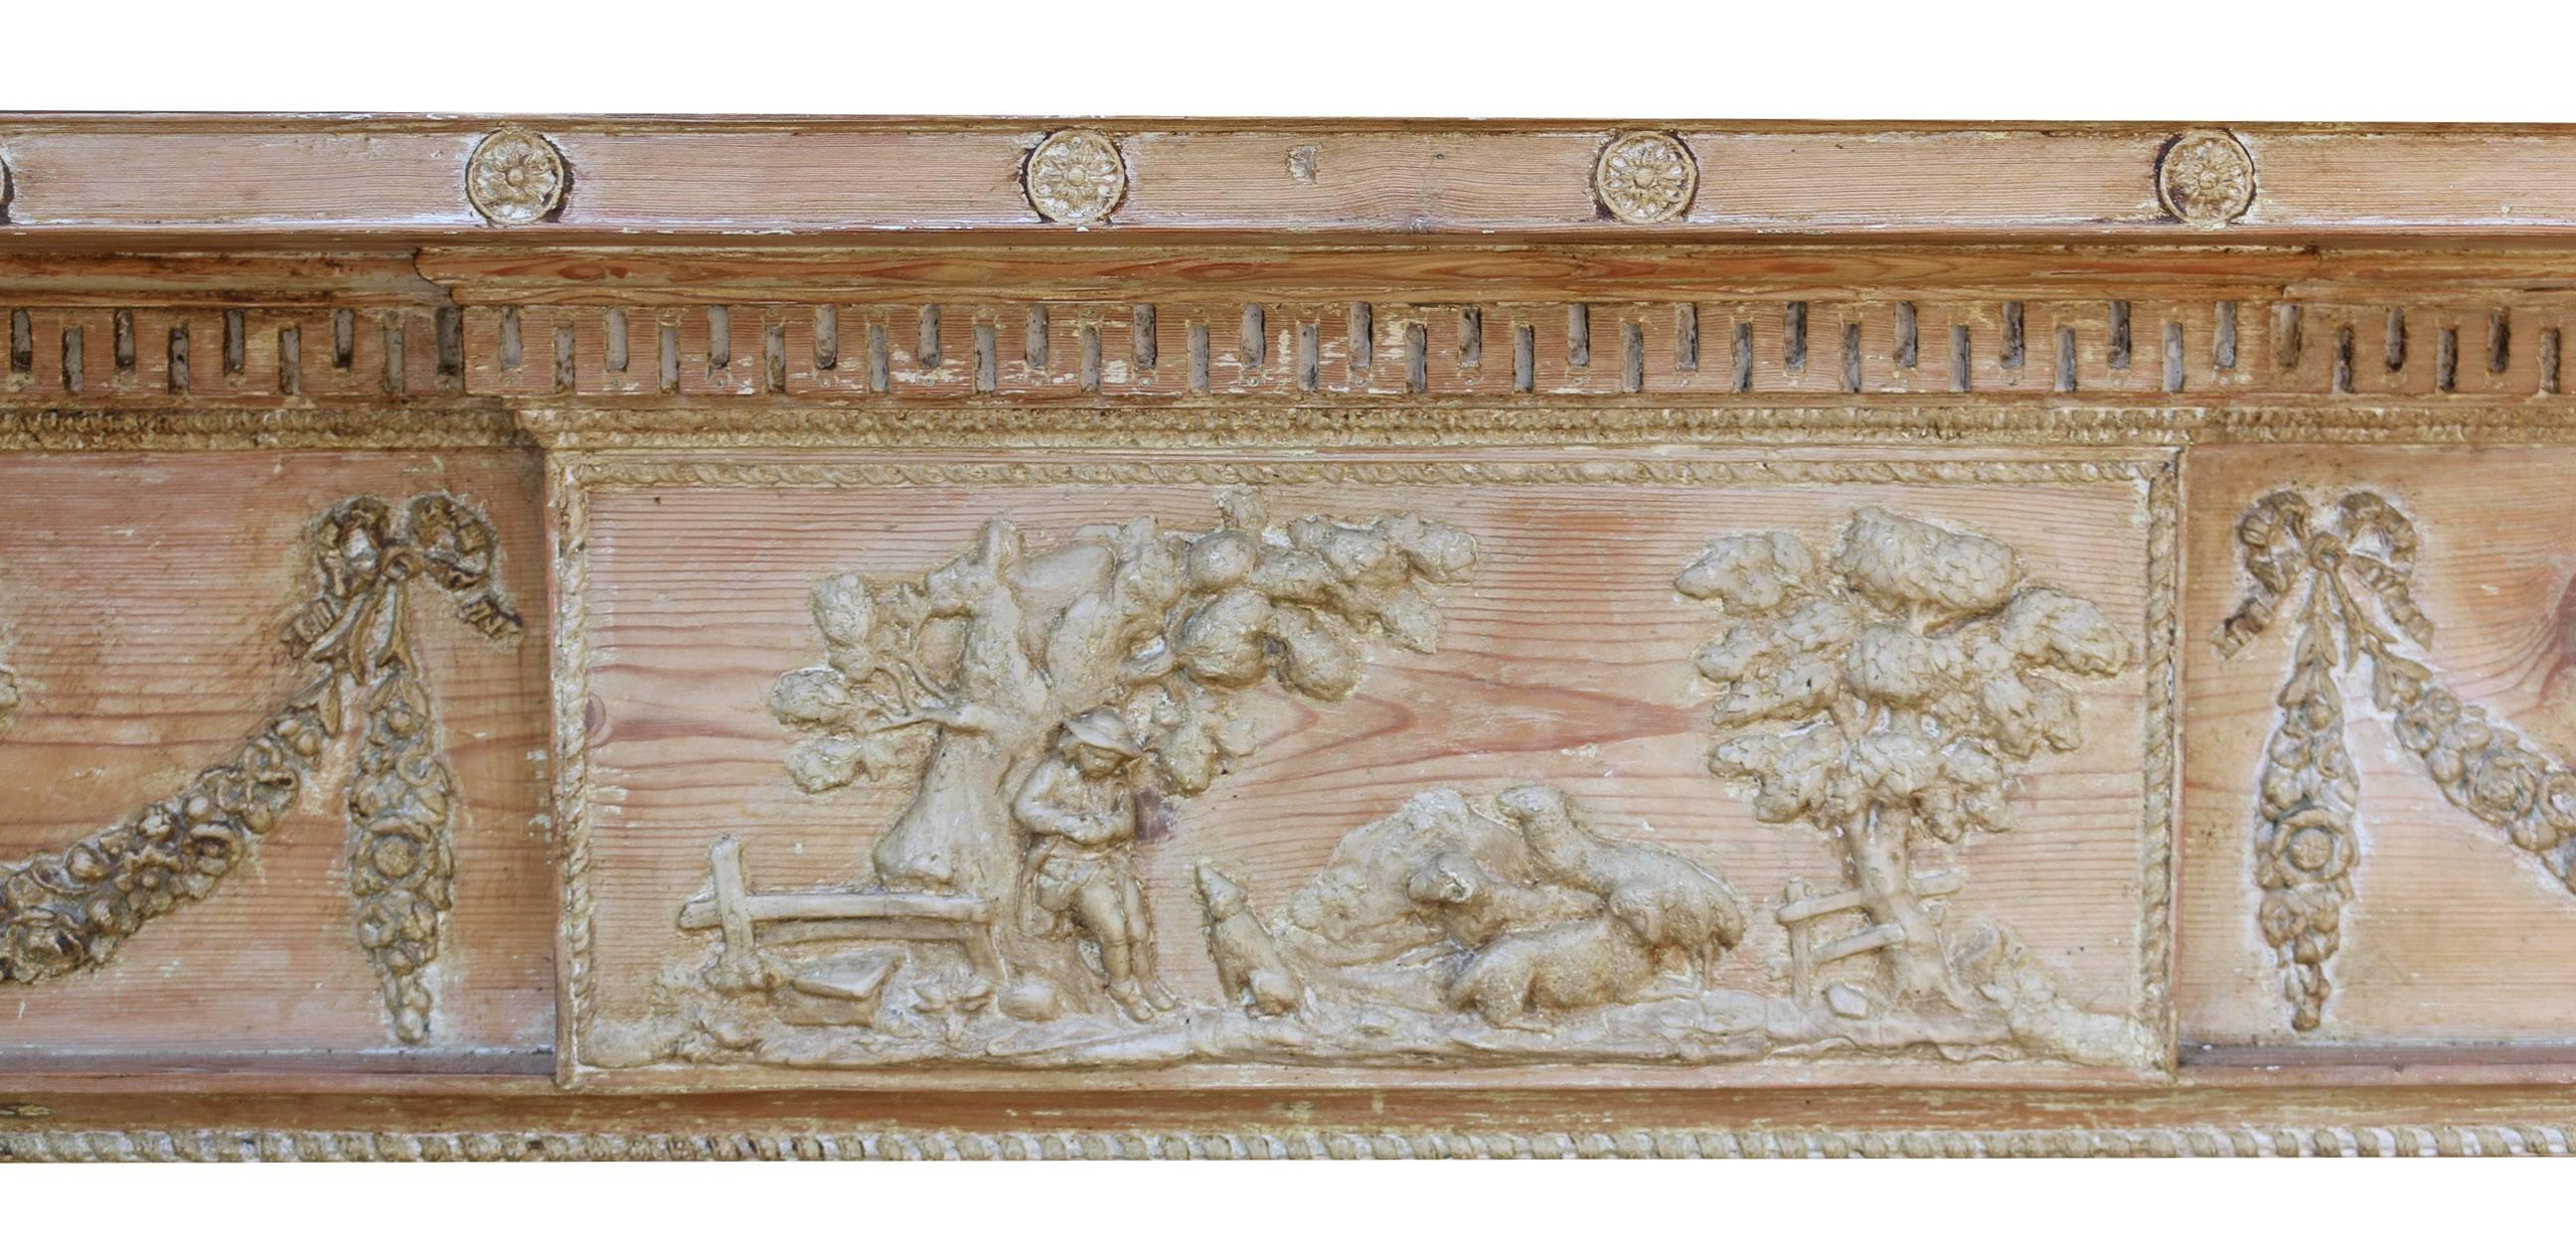 This fire surround has composition detail. It has previously been waxed and could be painted.
Measures: Opening height 101cm
Opening width 115cm
Width between legs 168cm.